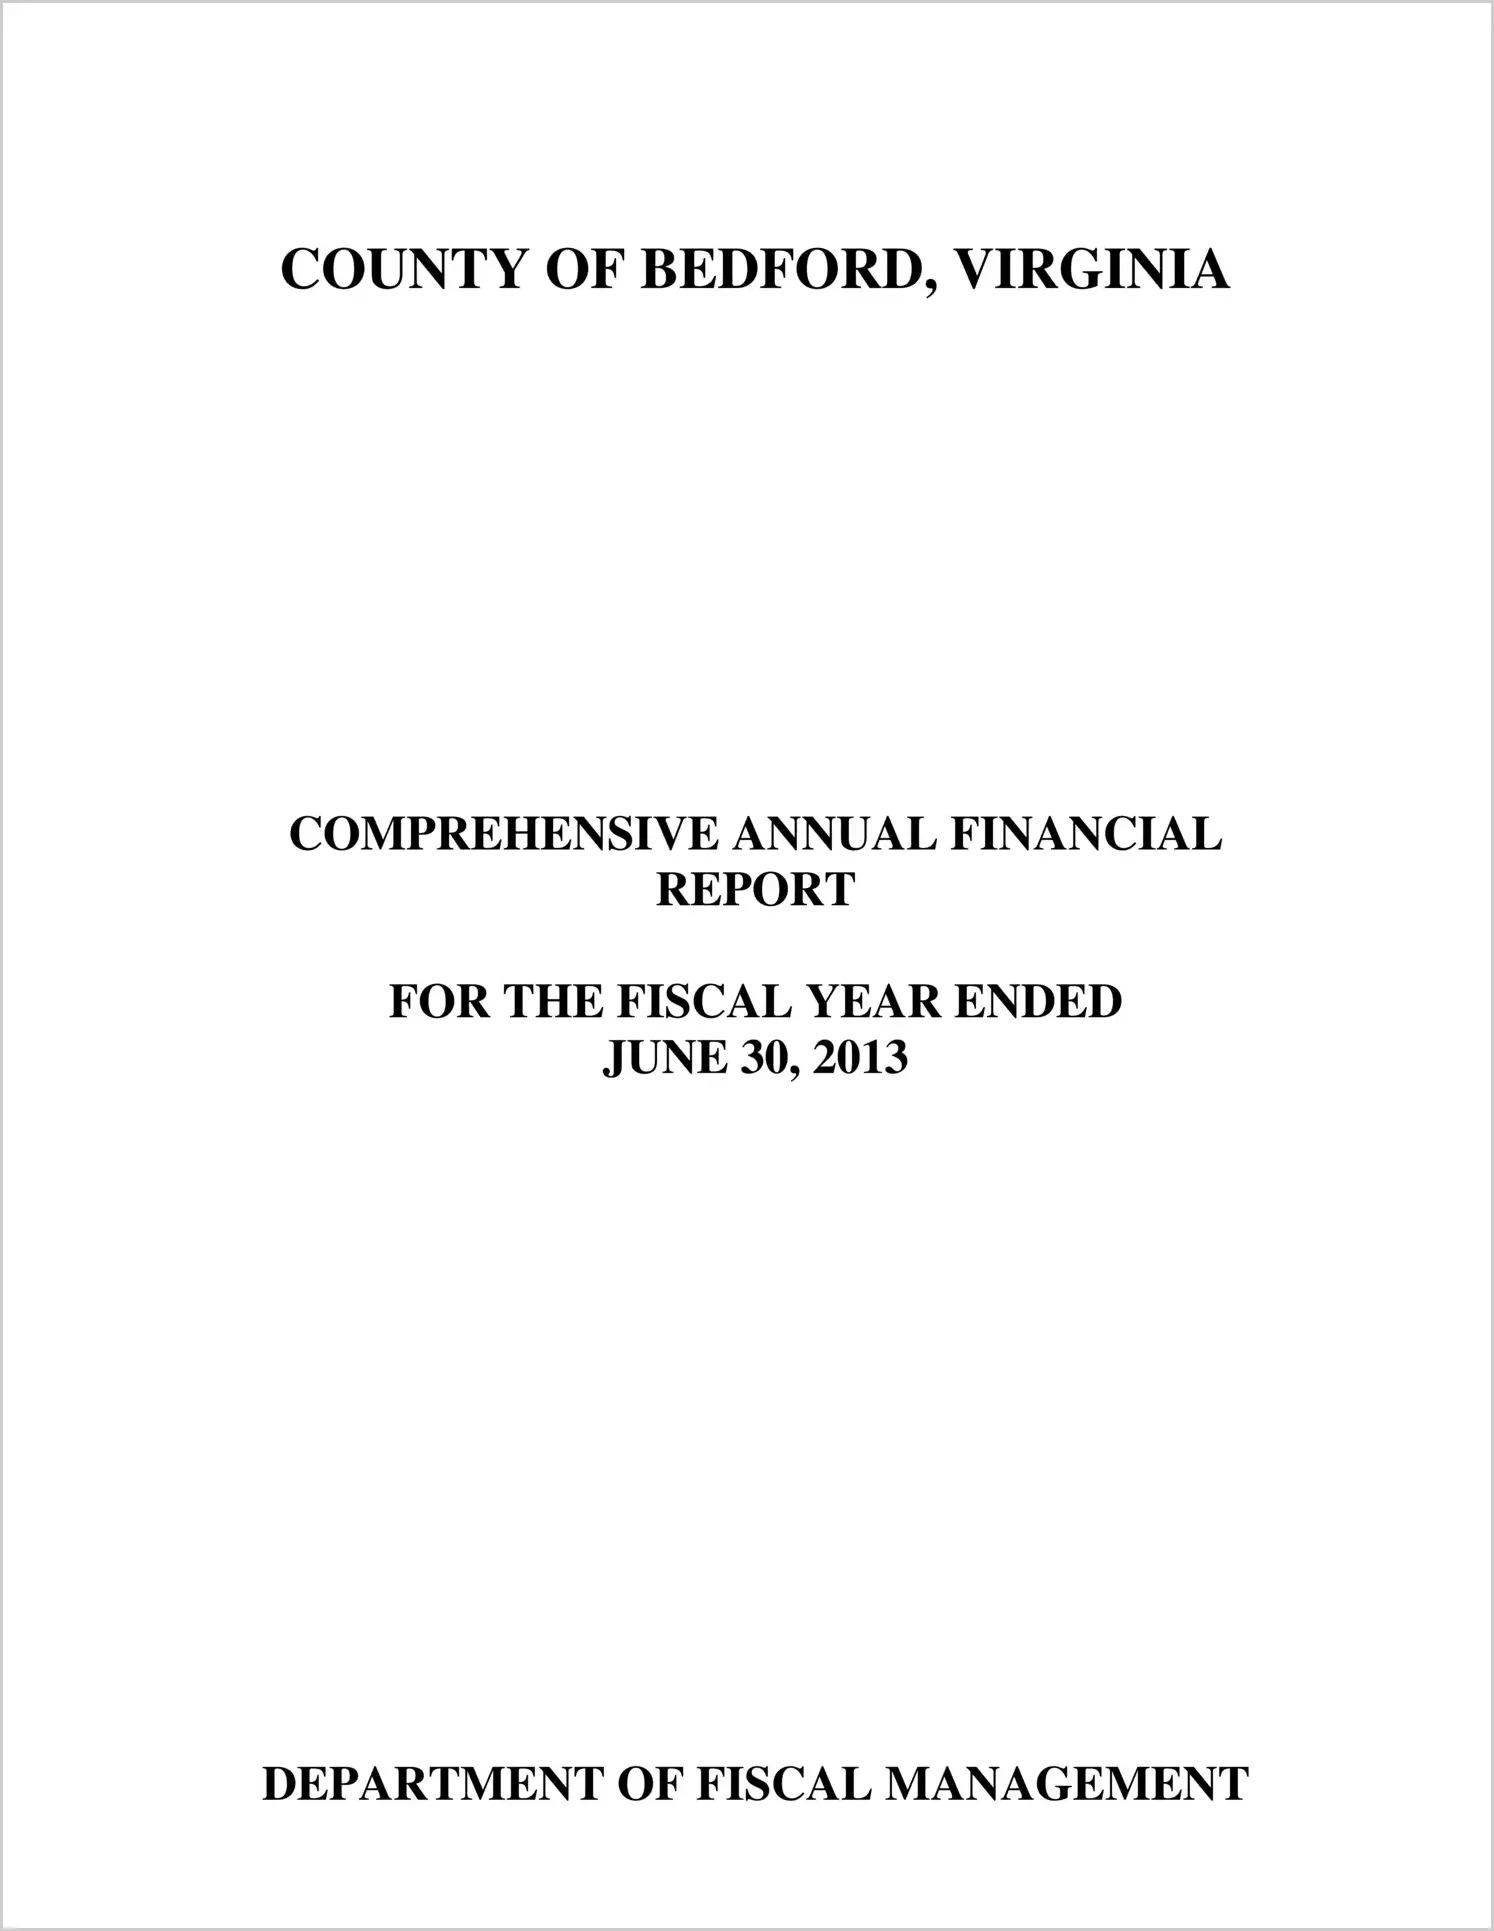 2013 Annual Financial Report for County of Bedford